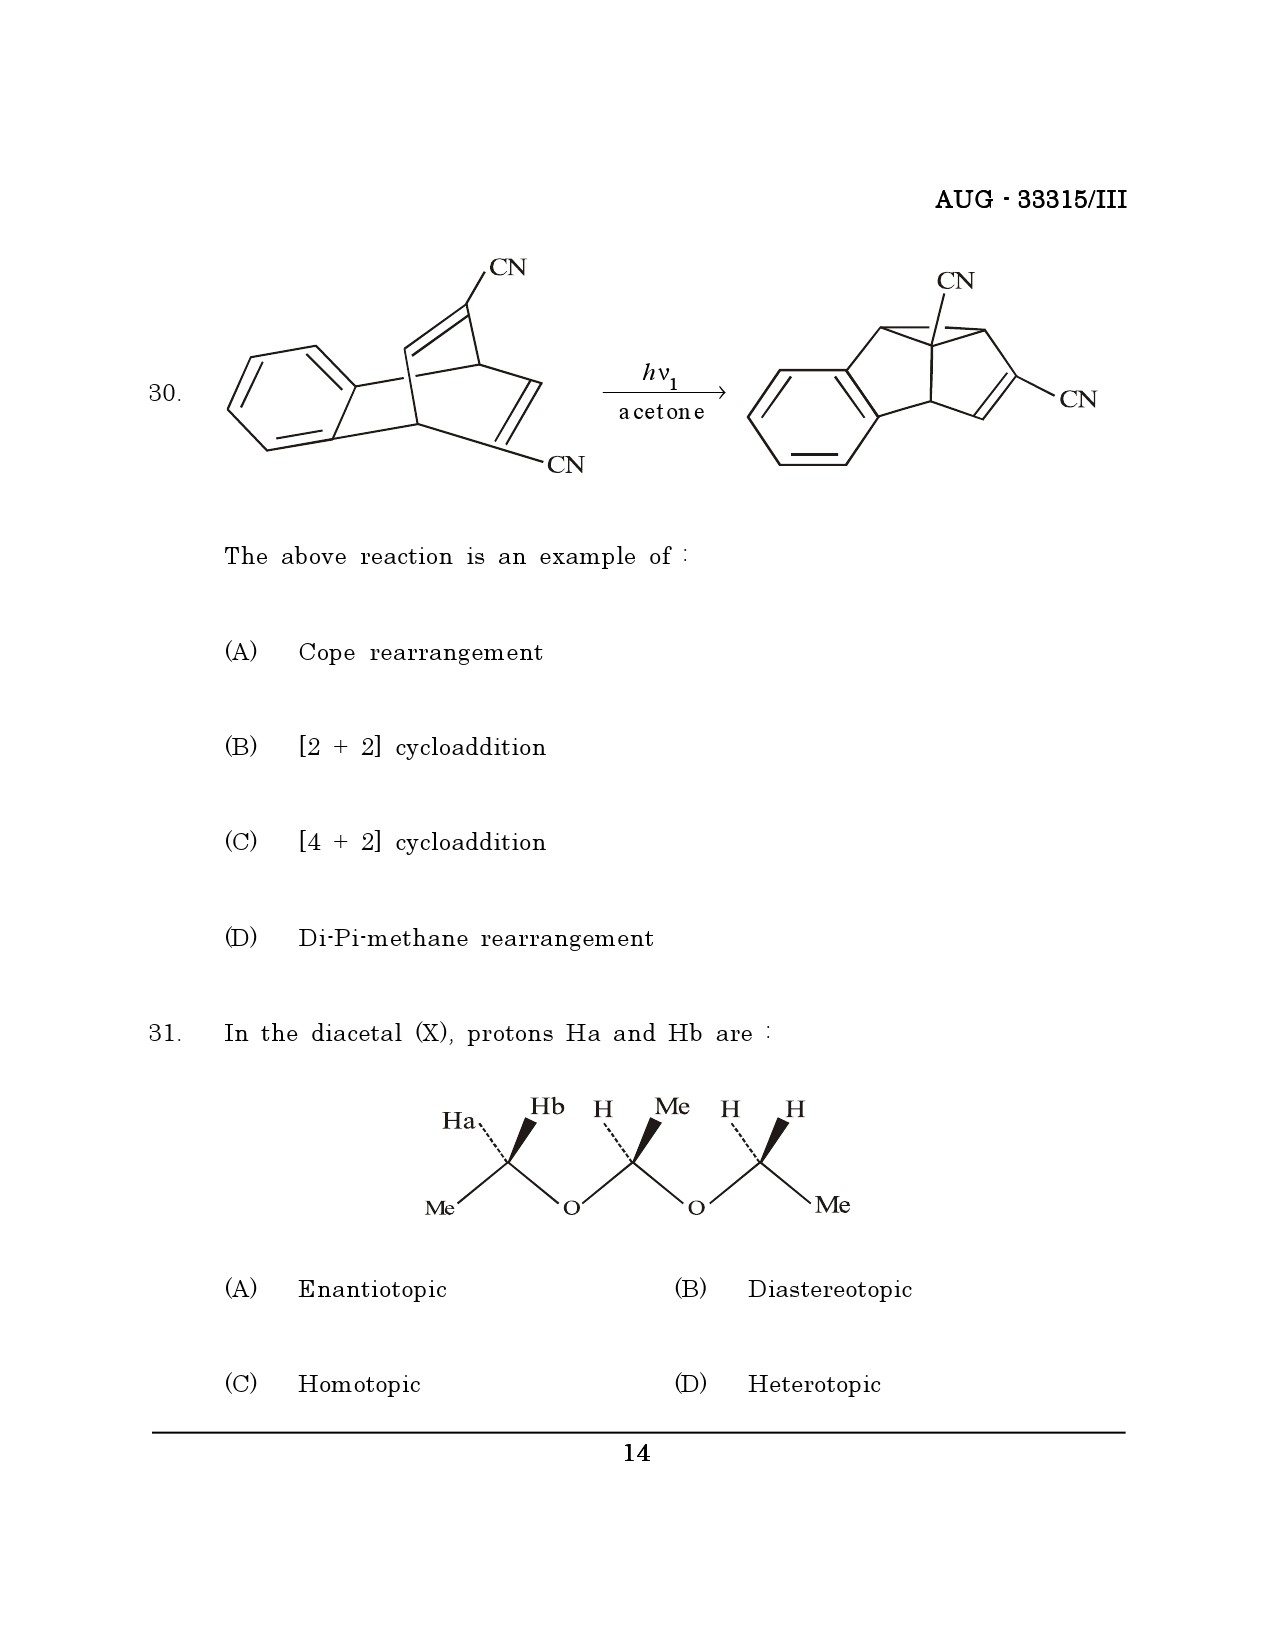 Maharashtra SET Chemical Sciences Question Paper III August 2015 13